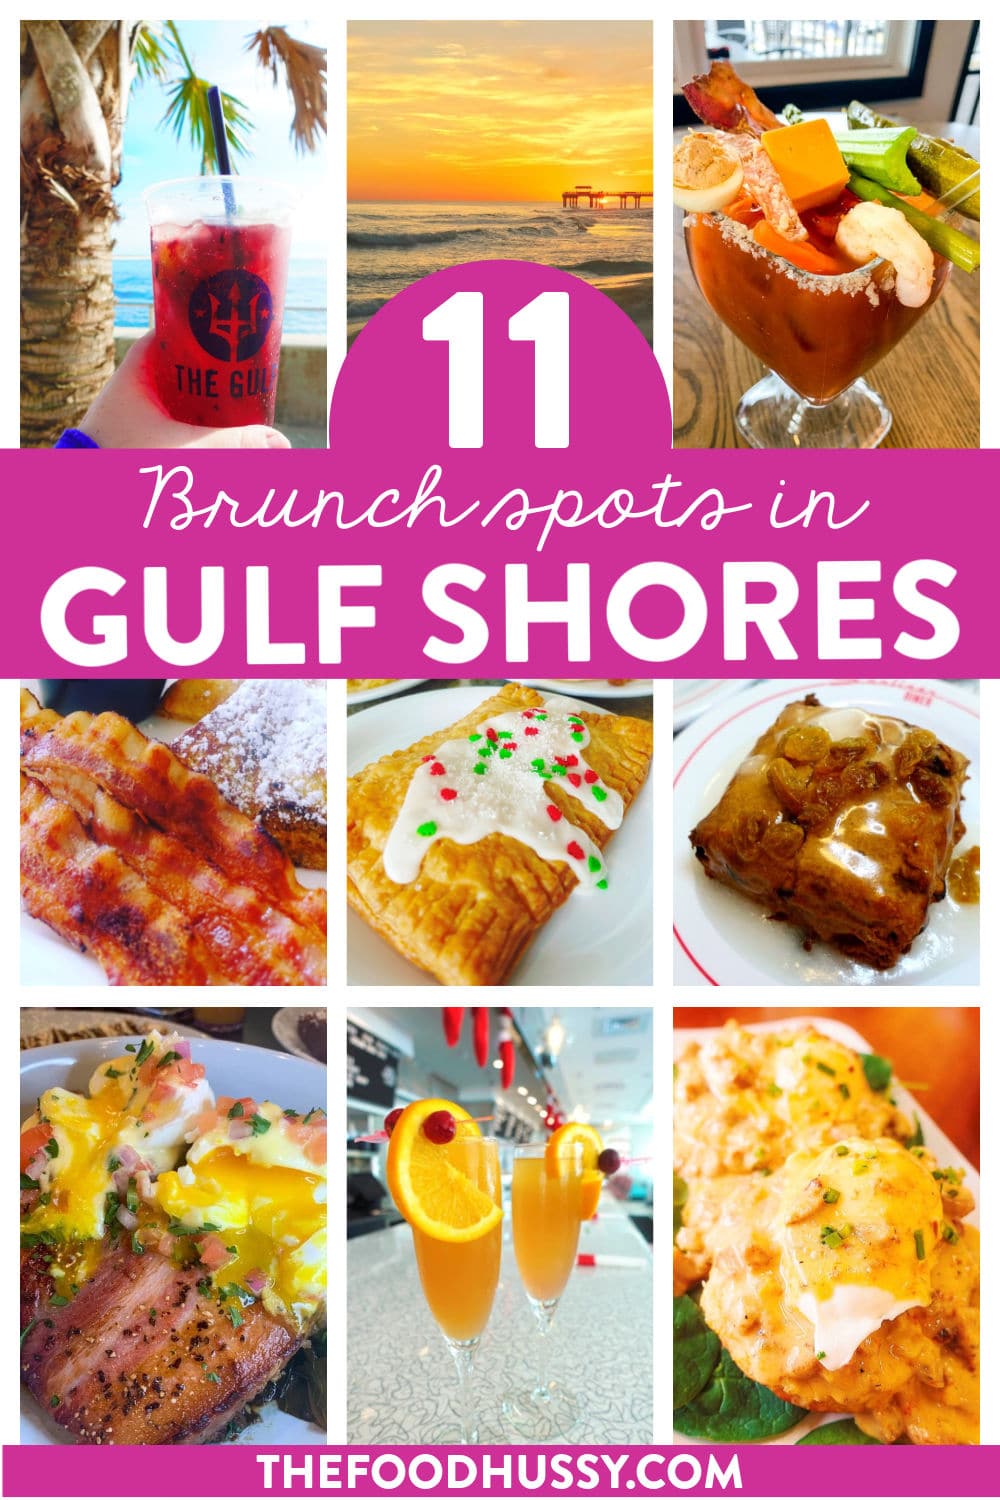 Gulf Shores, Alabama is my favorite vacation spot and there are countless delicious places to Brunch in Gulf Shores! I've got the best spots that you MUST check out! via @foodhussy